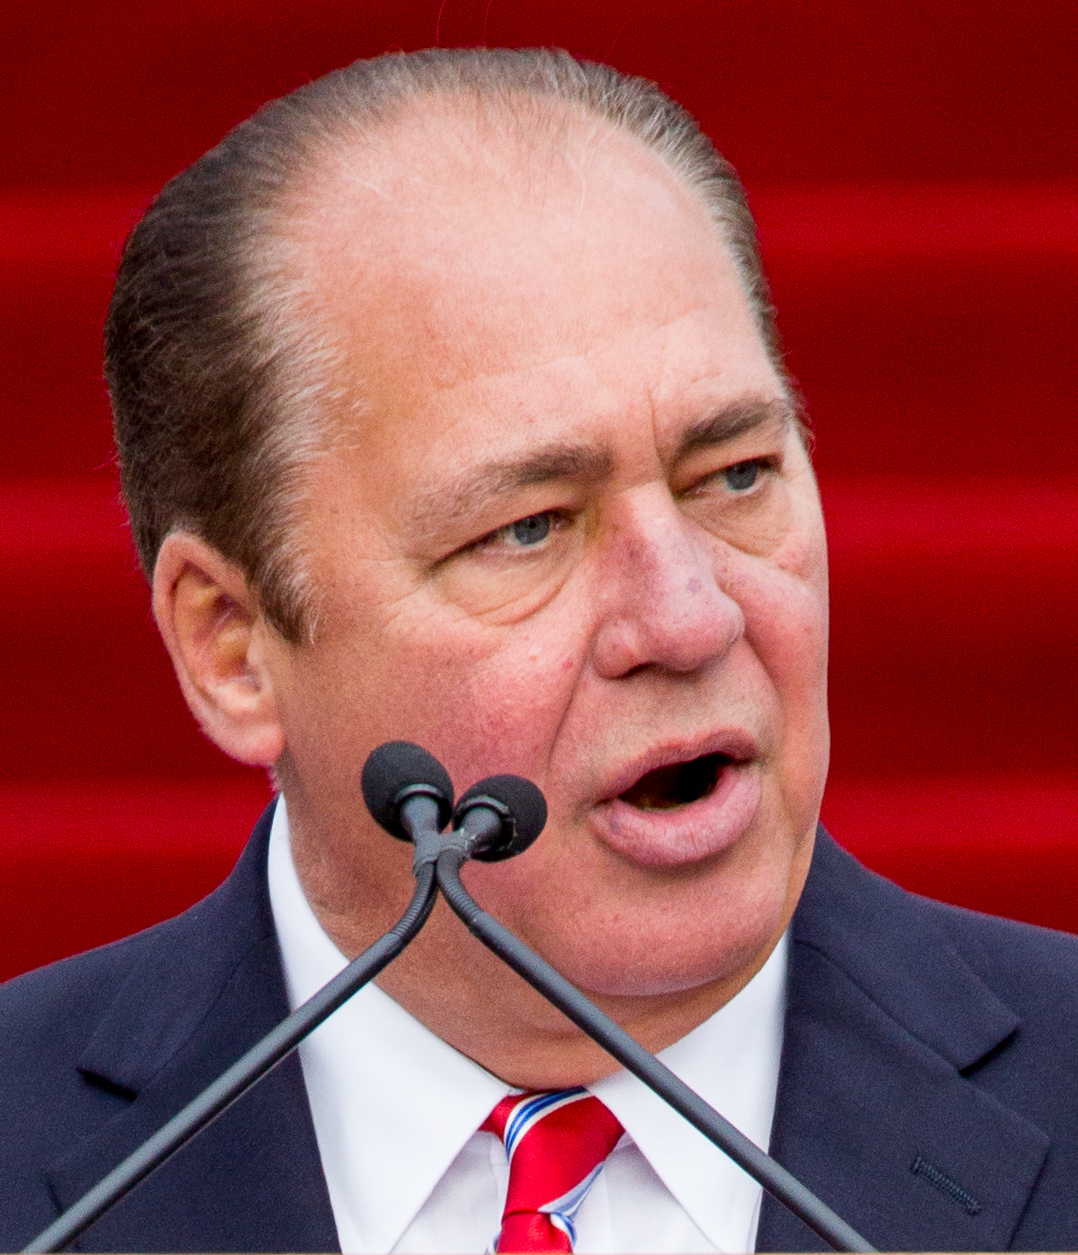 Earl Ray Tomblin (born March 15, 1952) is an American politician who served as the 35th governor of West Virginia from 2011 to 2017. A member of the Democratic Party, he previously served in the West Virginia Senate from 1980 to 2011 and as president of the West Virginia Senate from 1995 to 2011. Tomblin became acting governor in November 2010 following Joe Manchin's election to the U.S. Senate. He won a special election in October 2011 to fill the unexpired term ending on January 14, 2013, and was elected to a full term as governor in November 2012.